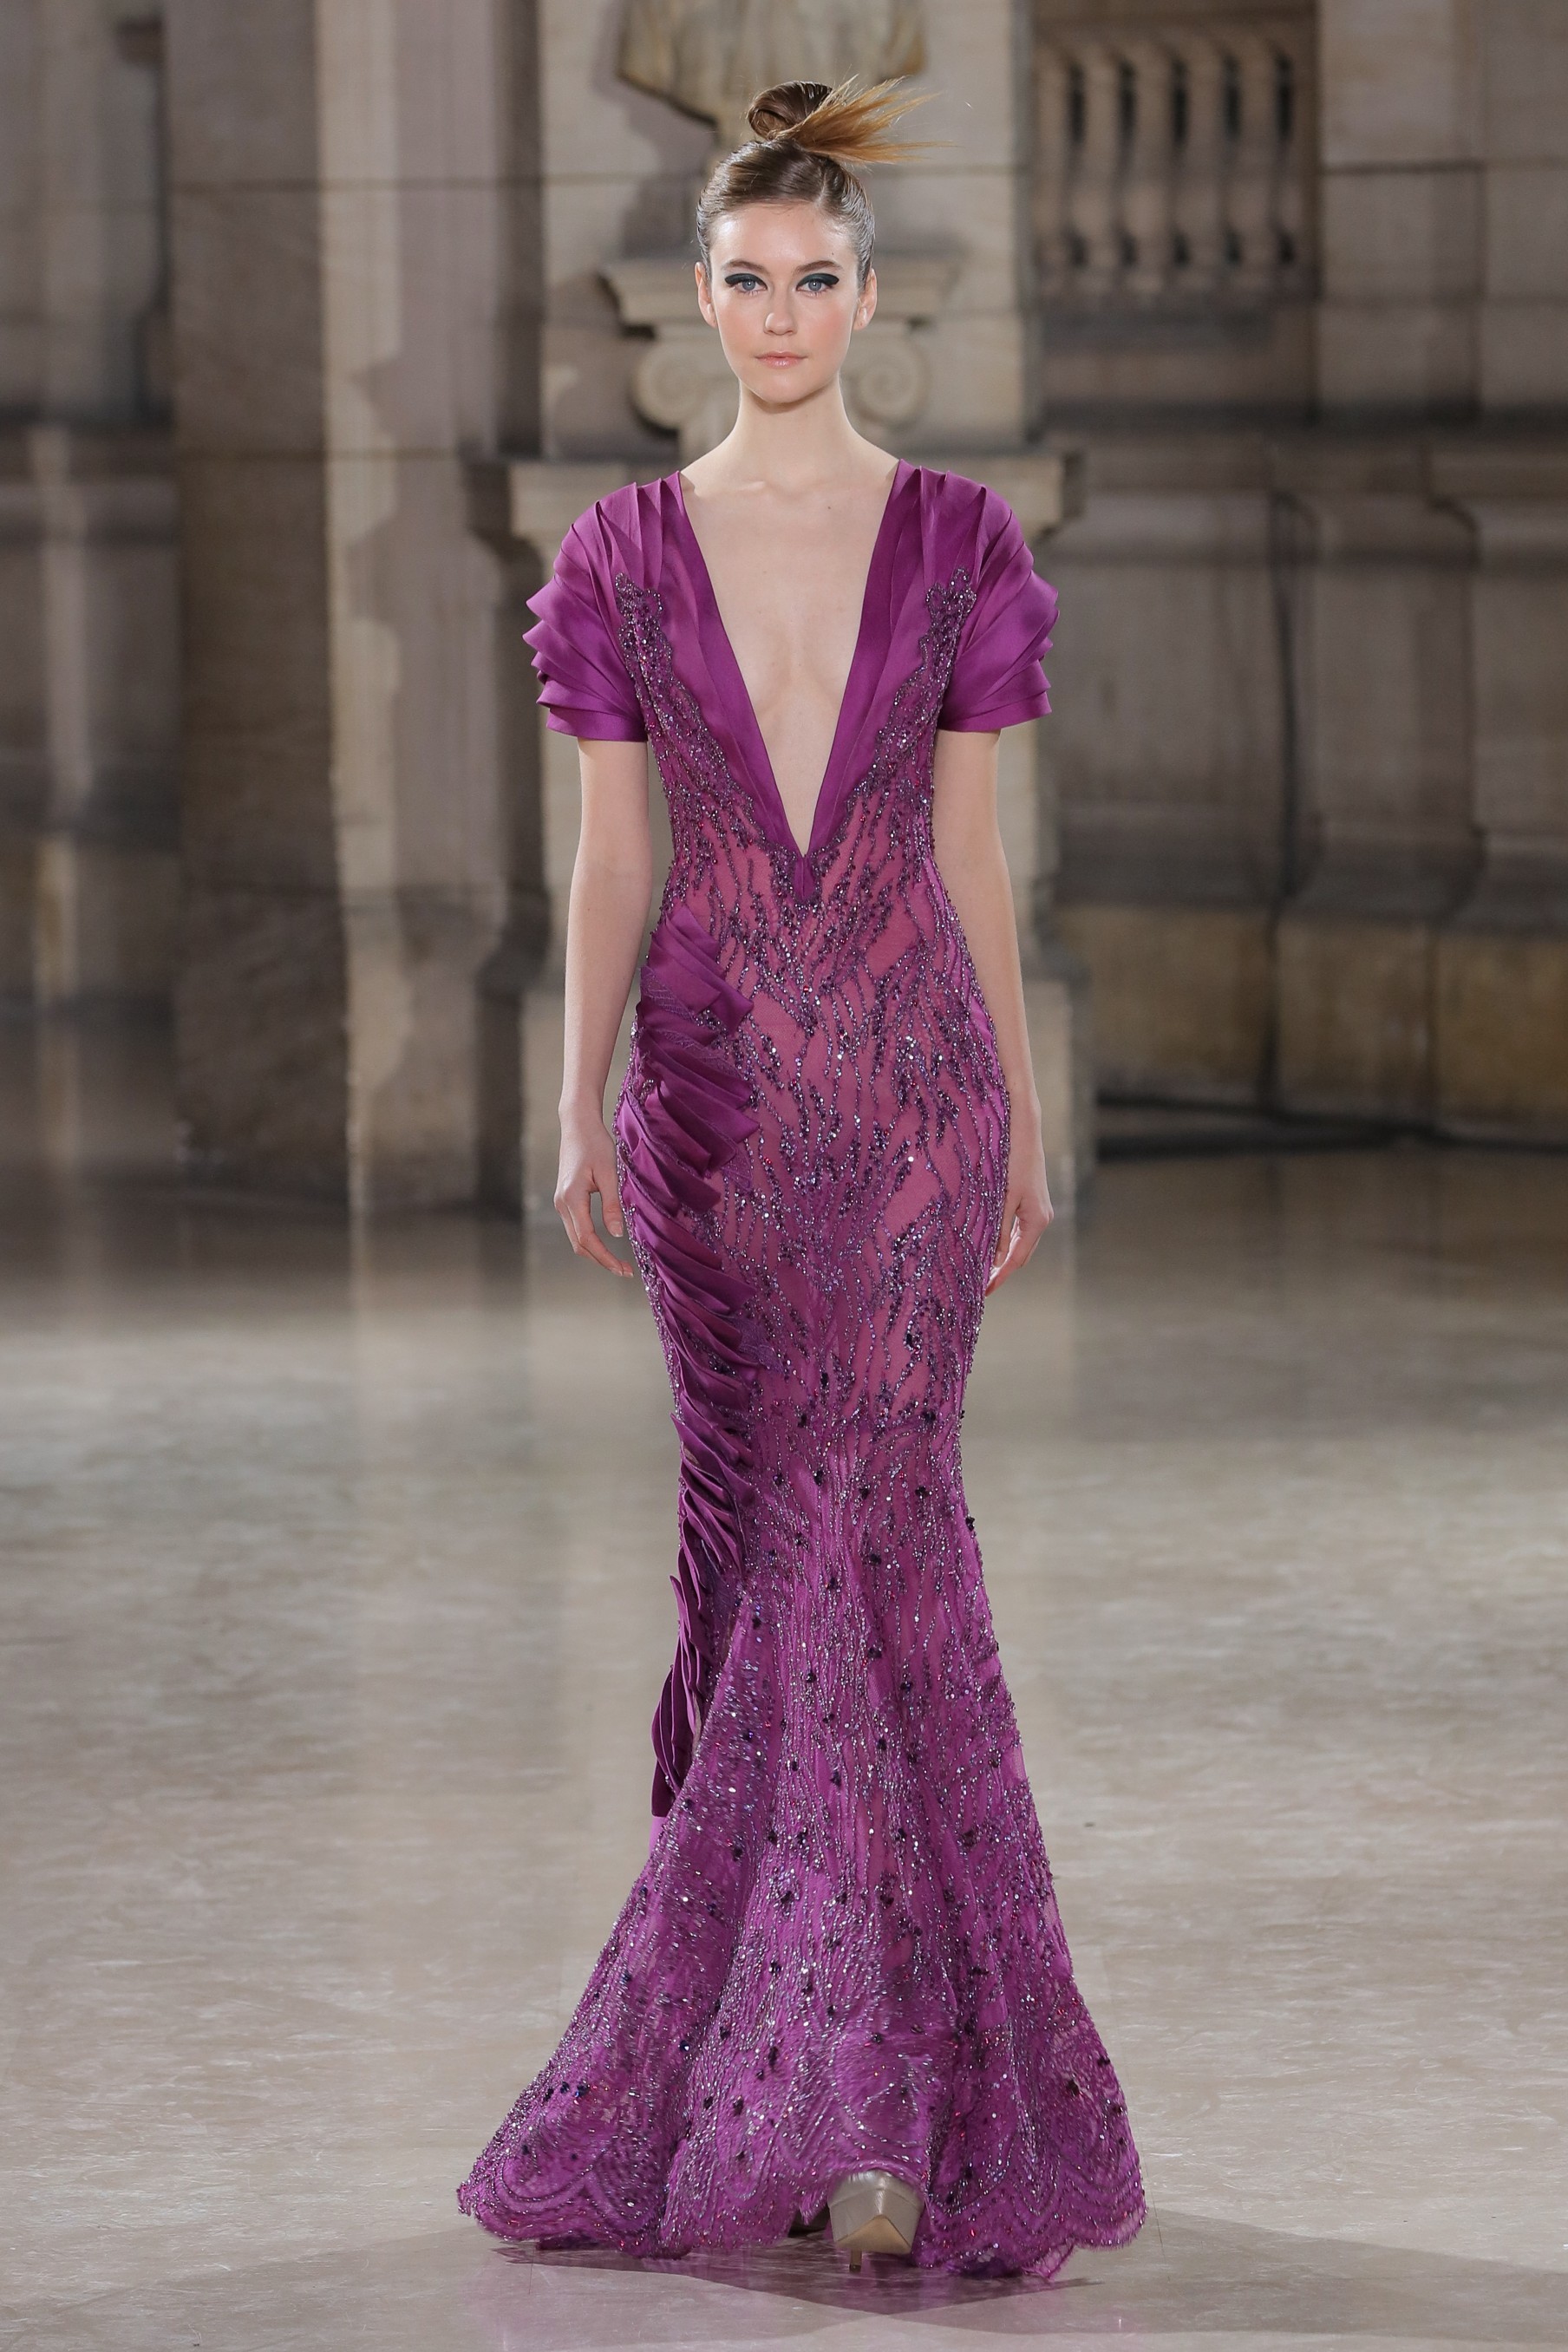 Spring 2019 Haute Couture: Tony Ward's Dragonflies — CoutureNotebook